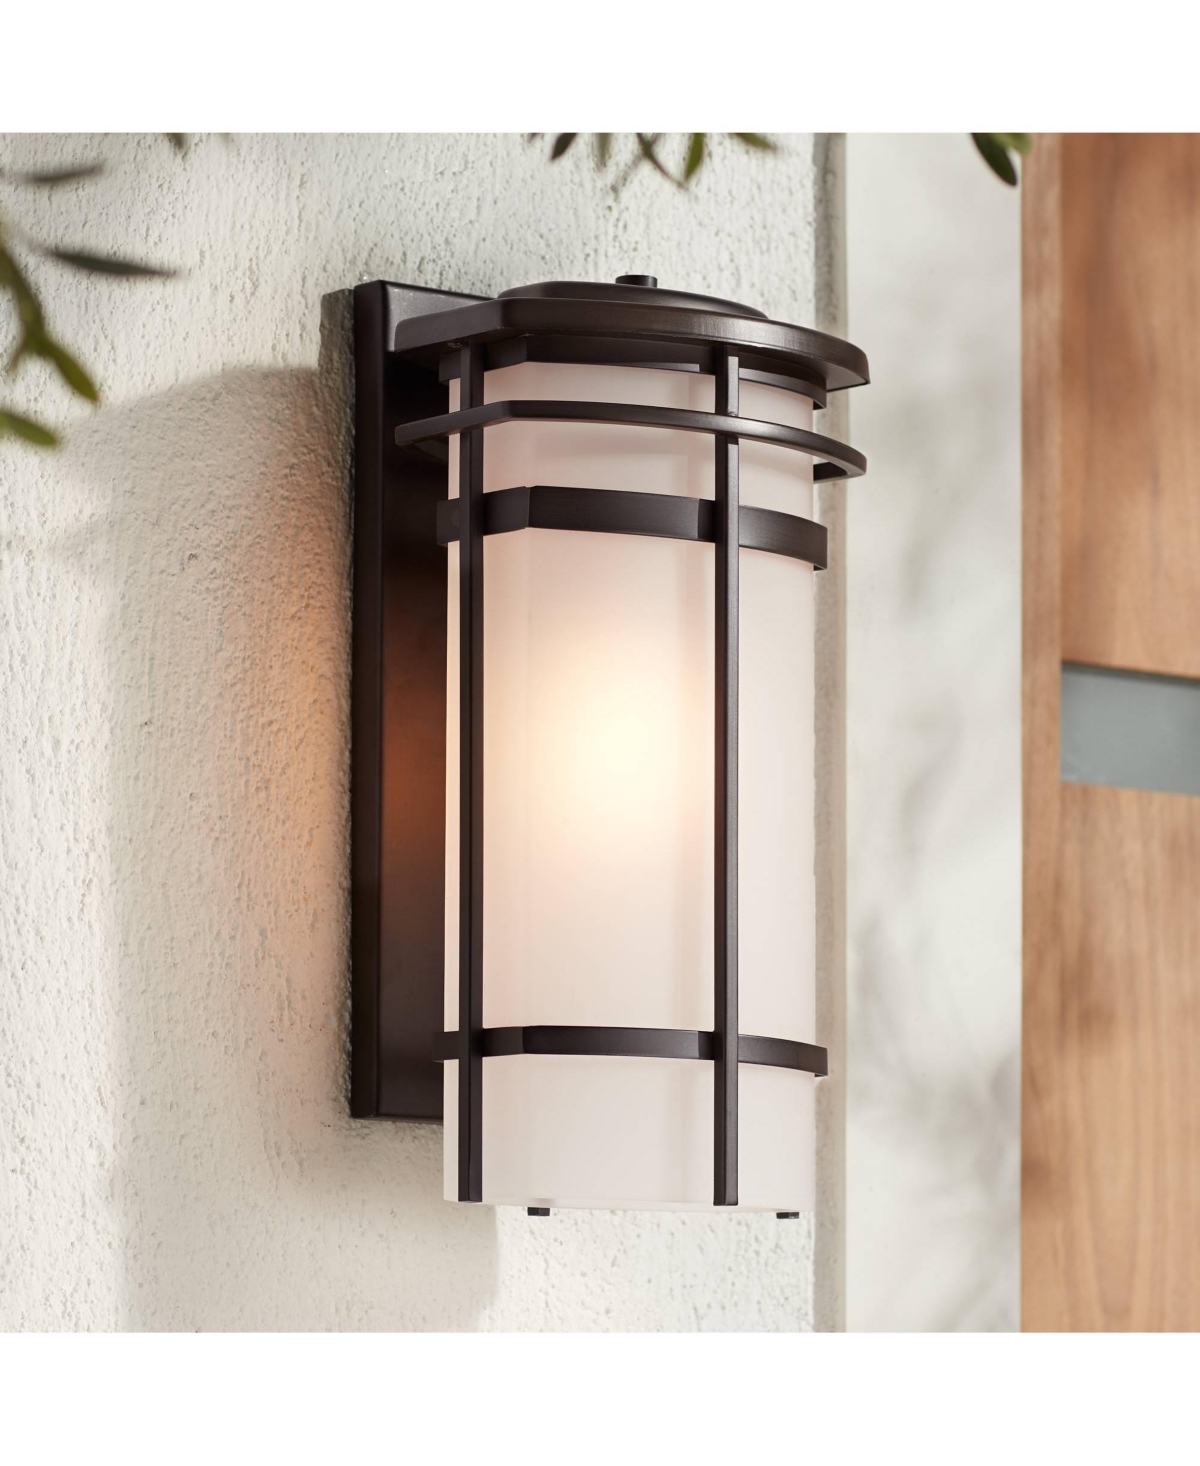 Theola Modern Outdoor Wall Light Fixture Bronze Led 16 1/4" Etched Glass Shade for Exterior Barn Deck House Porch Yard Patio Outside Garage Front Door